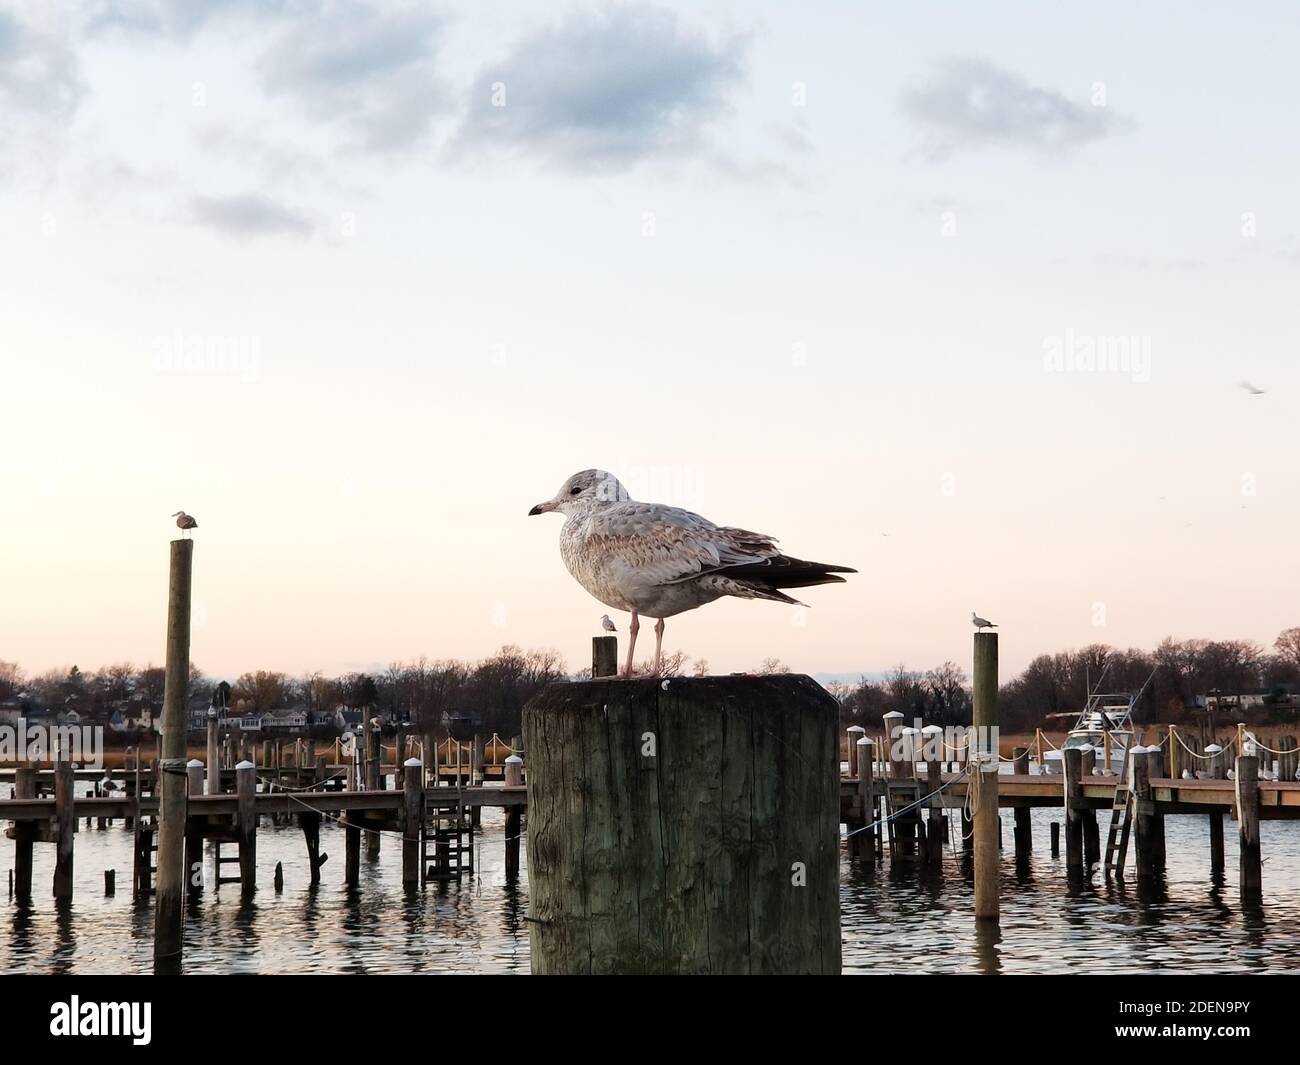 Group of seagulls jockeying for position on the wooden pilings of a marina -08 Stock Photo